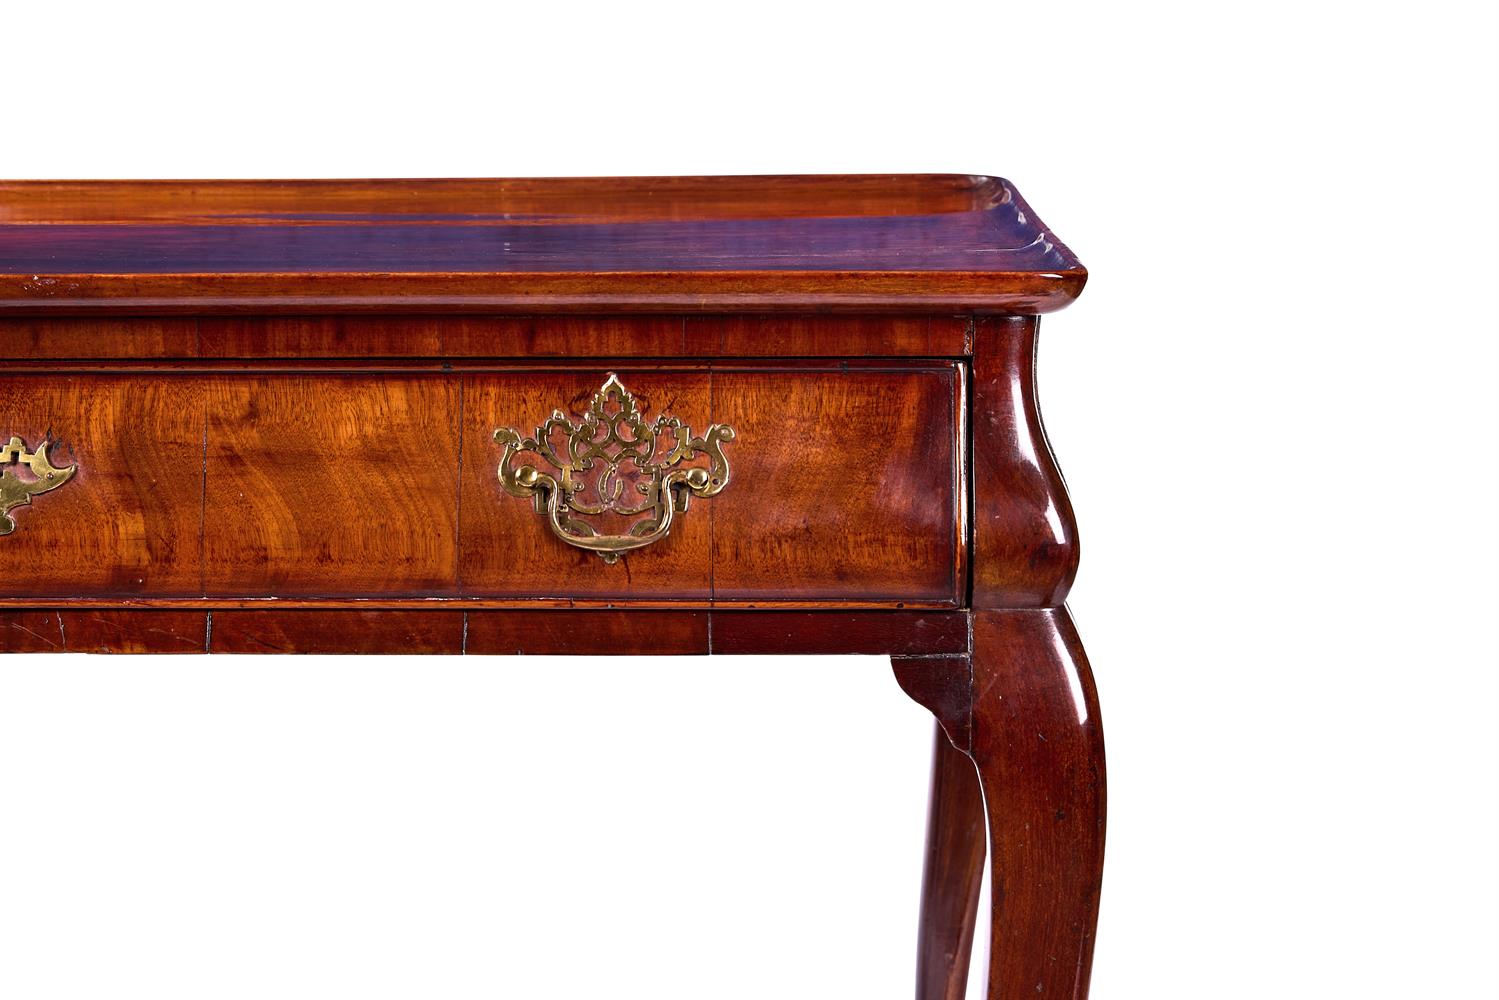 A DUTCH MAHOGANY SIDE TABLE MID 18TH CENTURY - Image 2 of 2